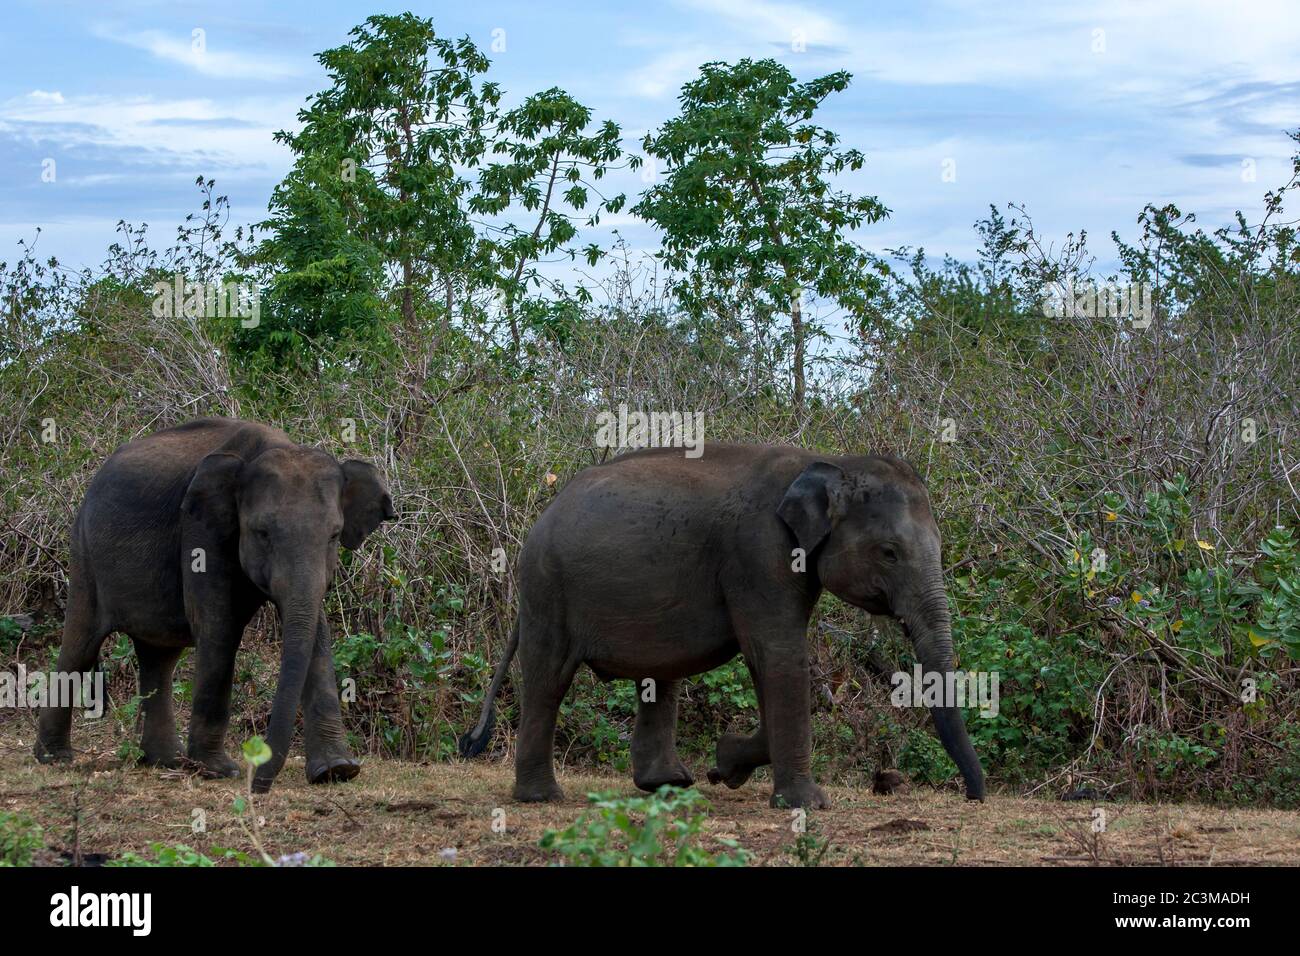 Elephants move past the savanna like vegetation within the Uda Walawe National Park which is located 21 km from Embilipitiya in southern Sri Lanka. Stock Photo